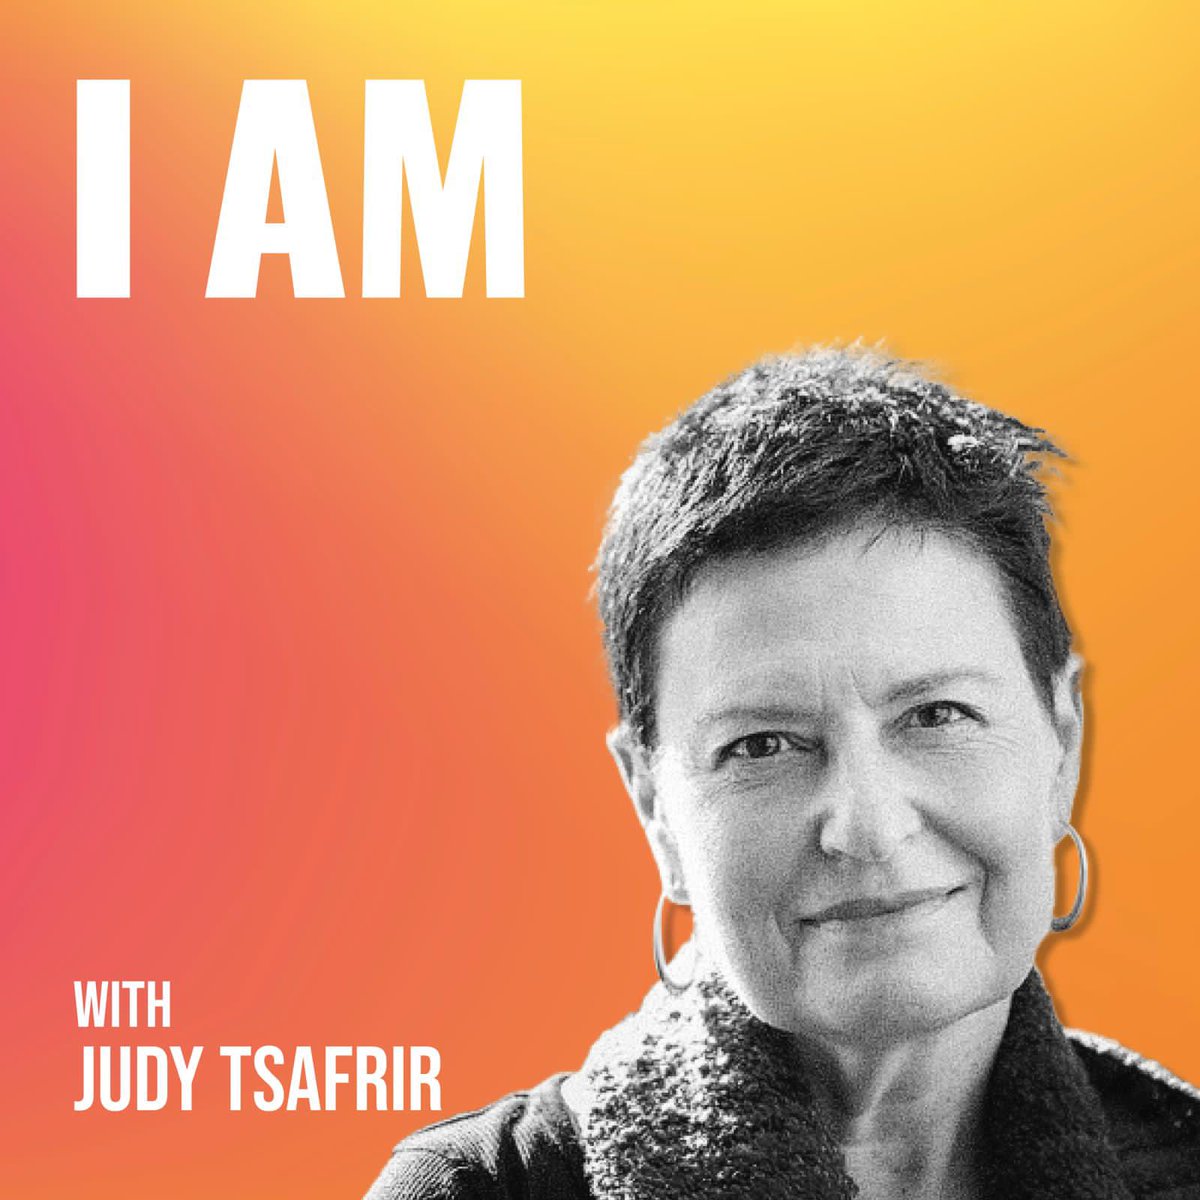 Today on I AM podcast Dr Judy Tsafrir opens up greater possibility in our lives by offering a more sacred connection with everything around and within us. Interested in bringing back the beauty to everything? podcasts.apple.com/gb/podcast/i-a… open.spotify.com/episode/0cd7lR… open.spotify.com/episode/0cd7lR…